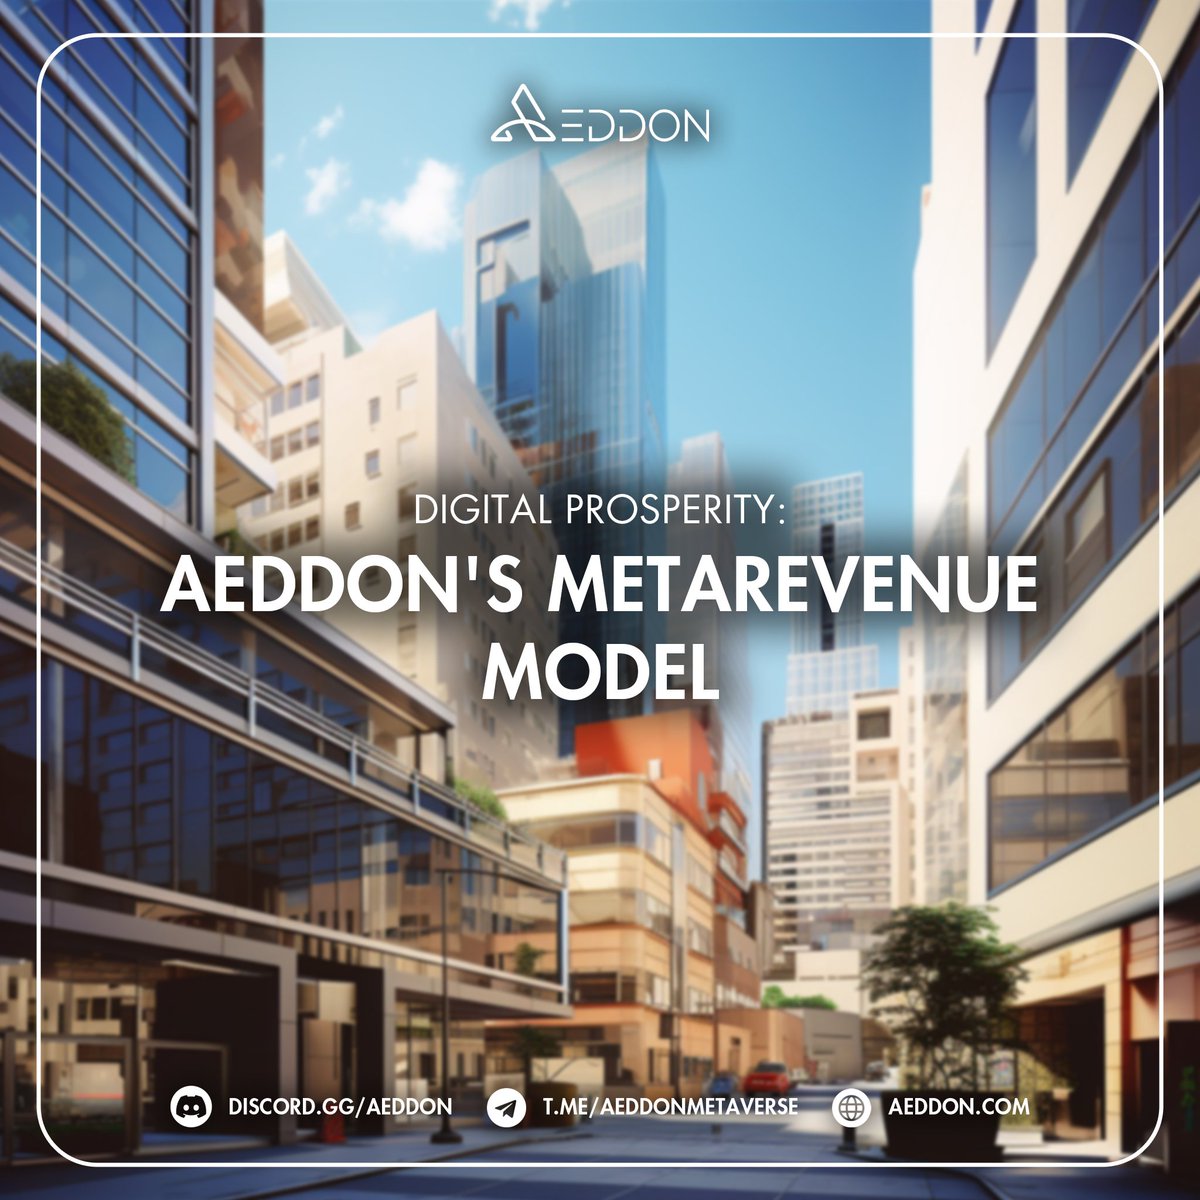 💰 Harness the power of the #AeddonMetaverse's revenue model. 
Pioneer new monetization opportunities for your business in the Metaverse. 
Embrace digital prosperity today! 📈

t.me/AeddonMetaverse

#MetaRevenue #DigitalProsperity